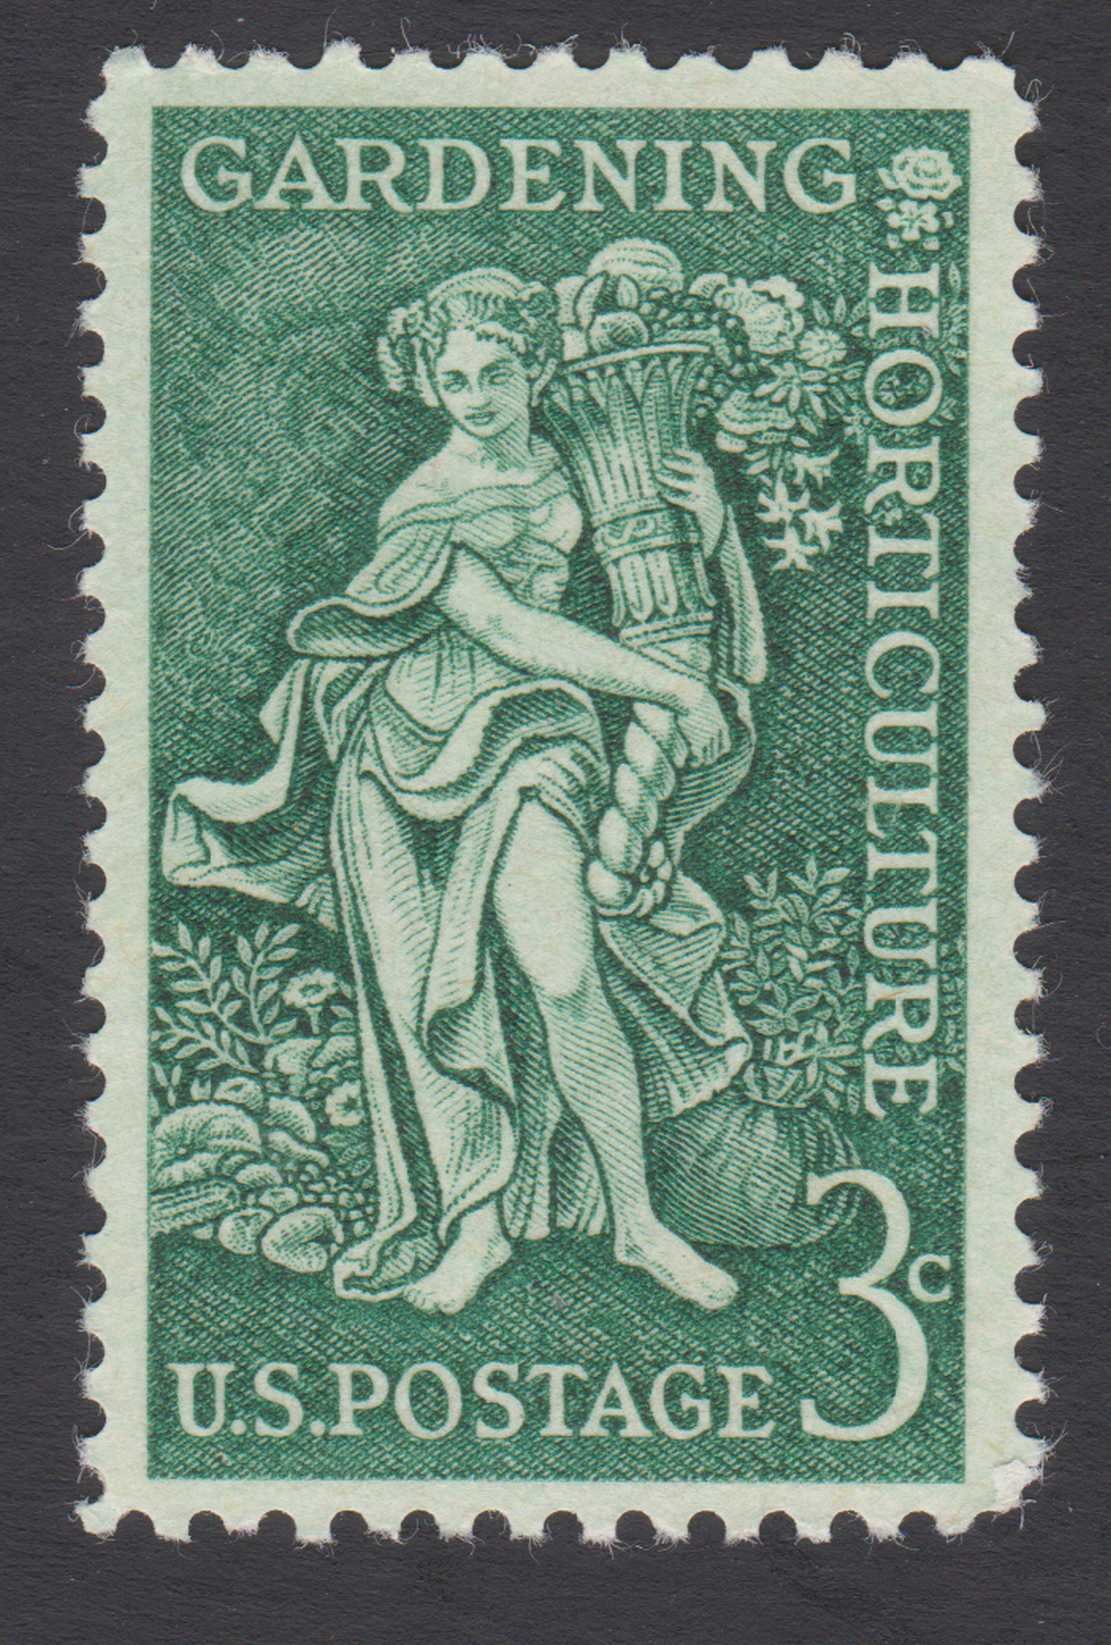 Postage Stamps Gardening And Horiculture Sc. 1100 MNHVF